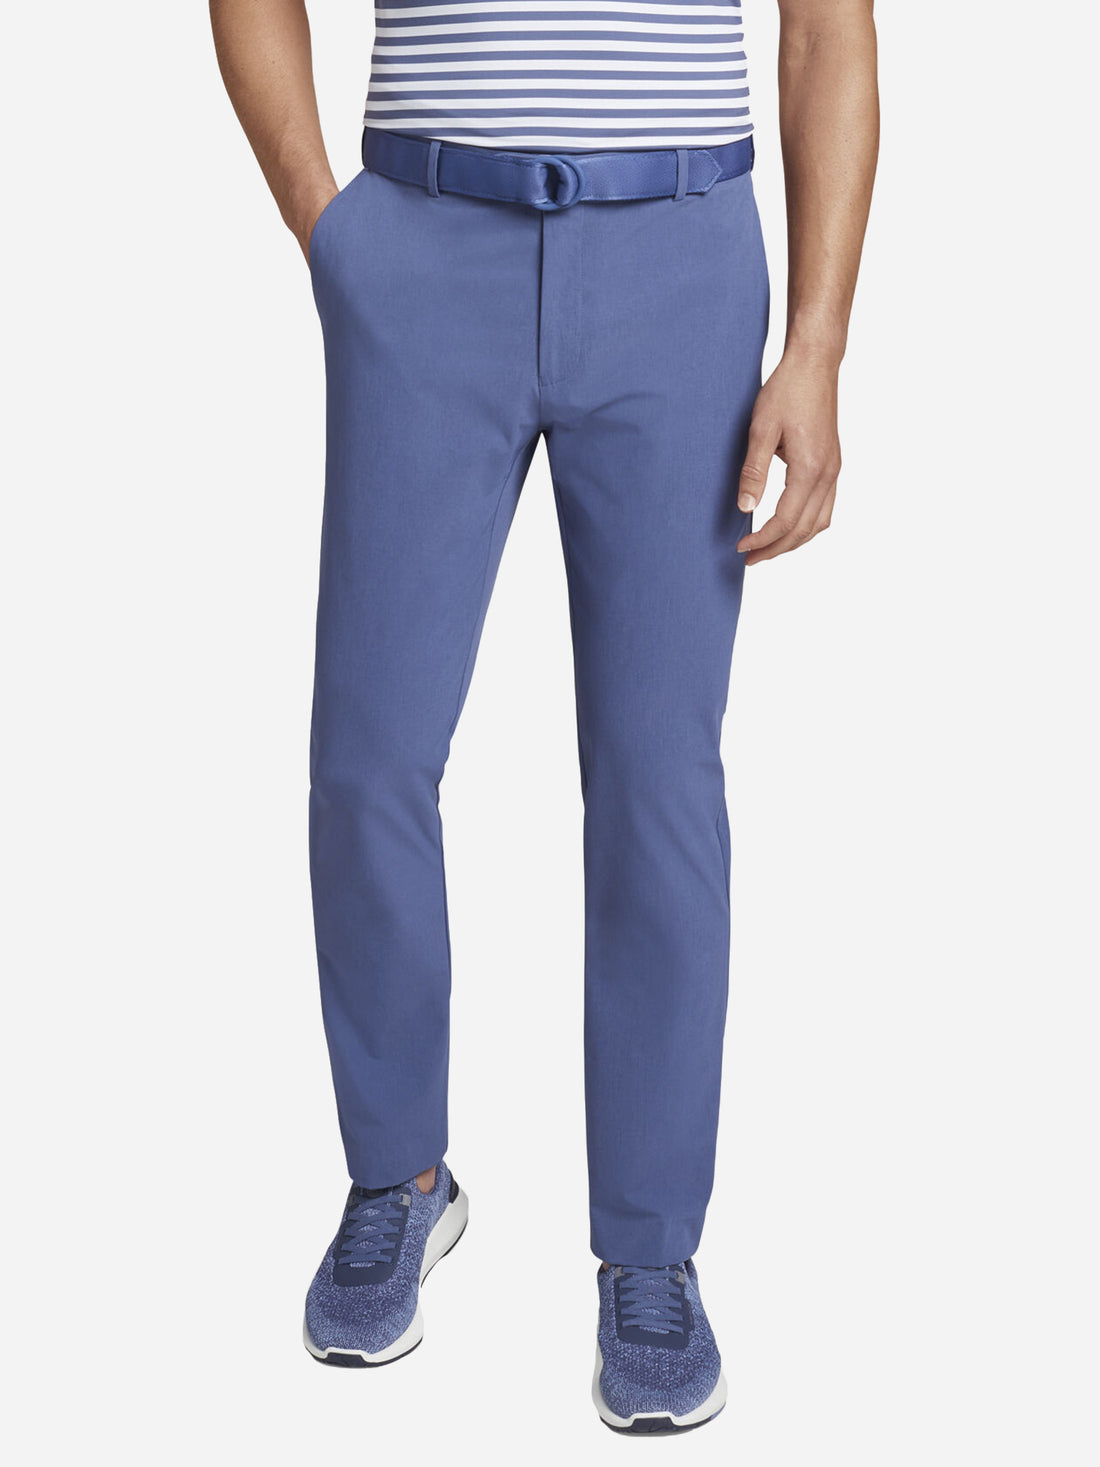 Peter Millar Crown Crafted Men's Surge Performance Trouser ...